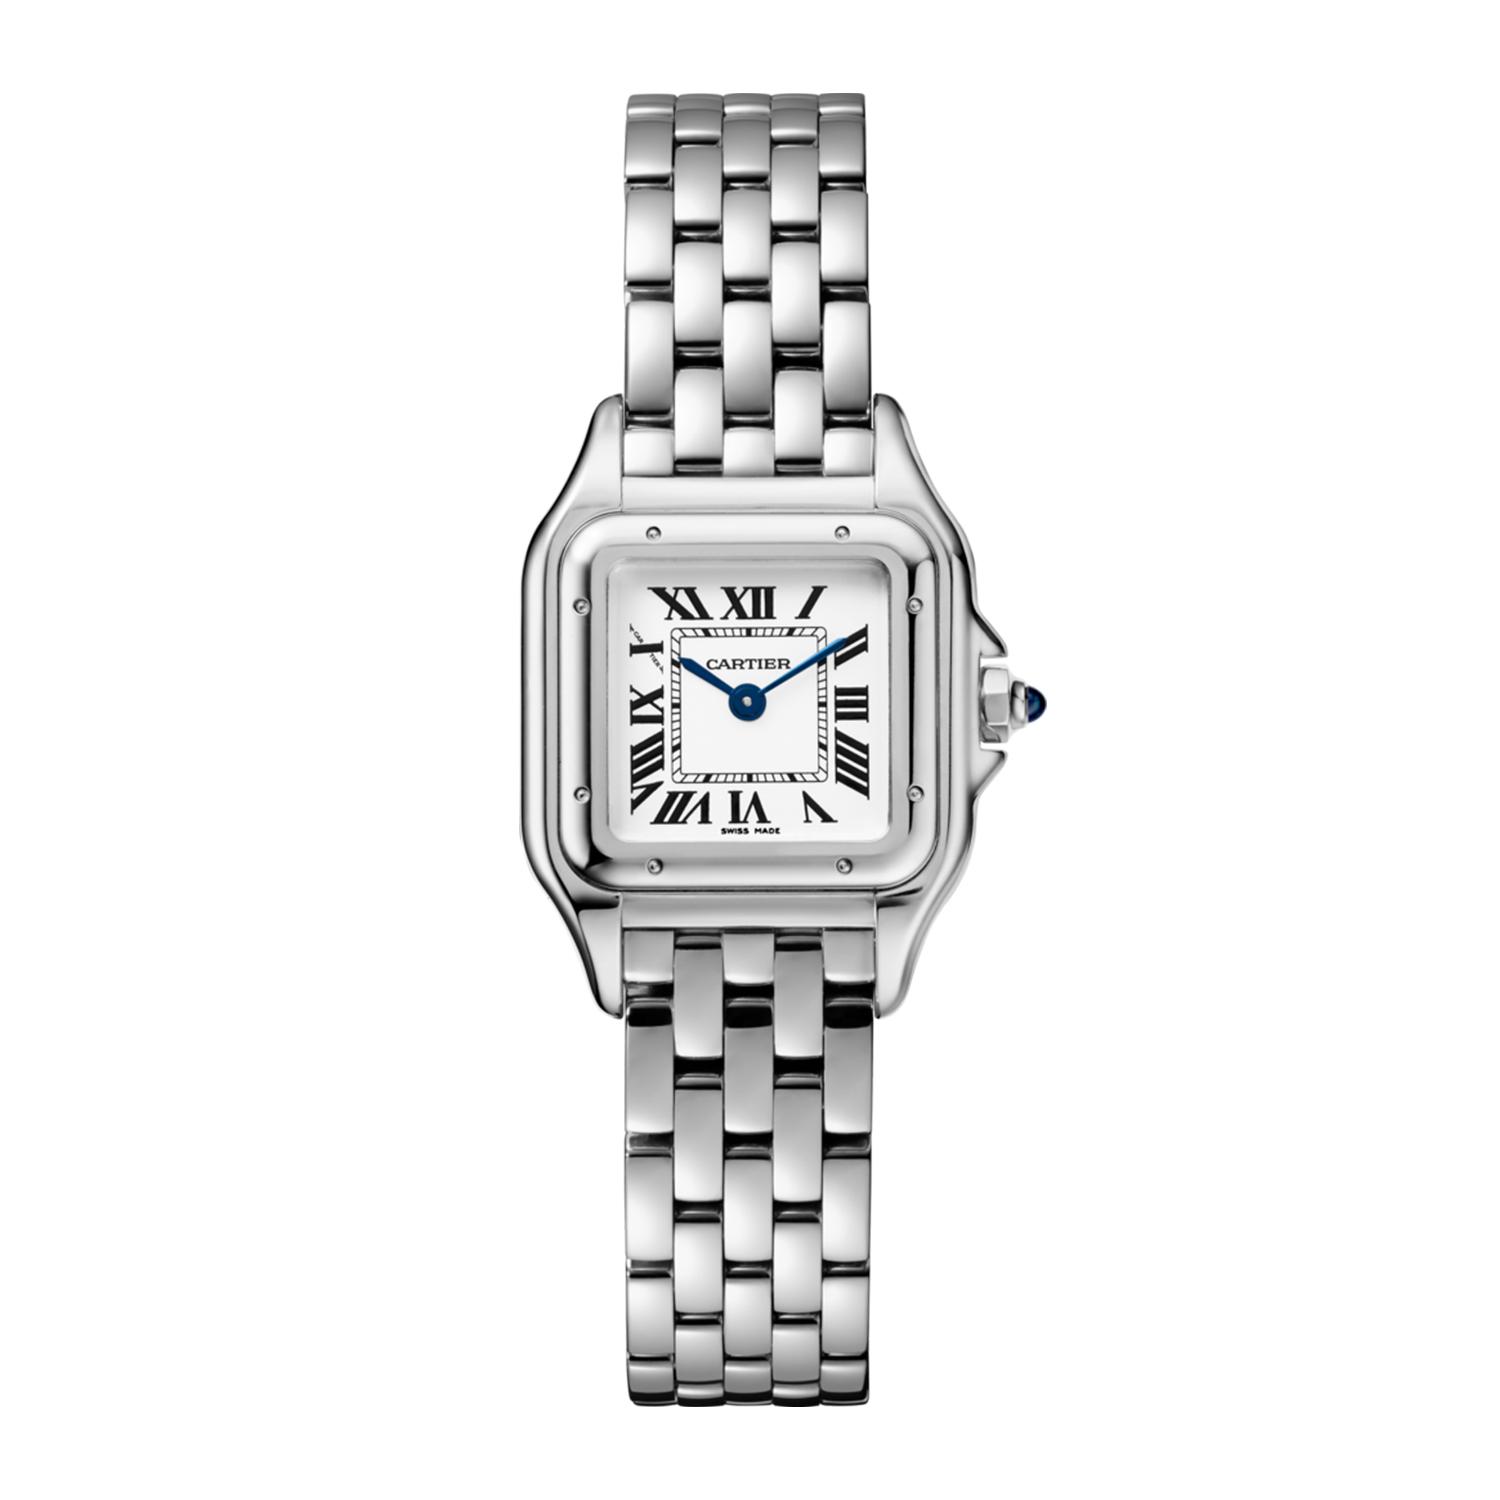 Panthere De Cartier Watch, size Small 0